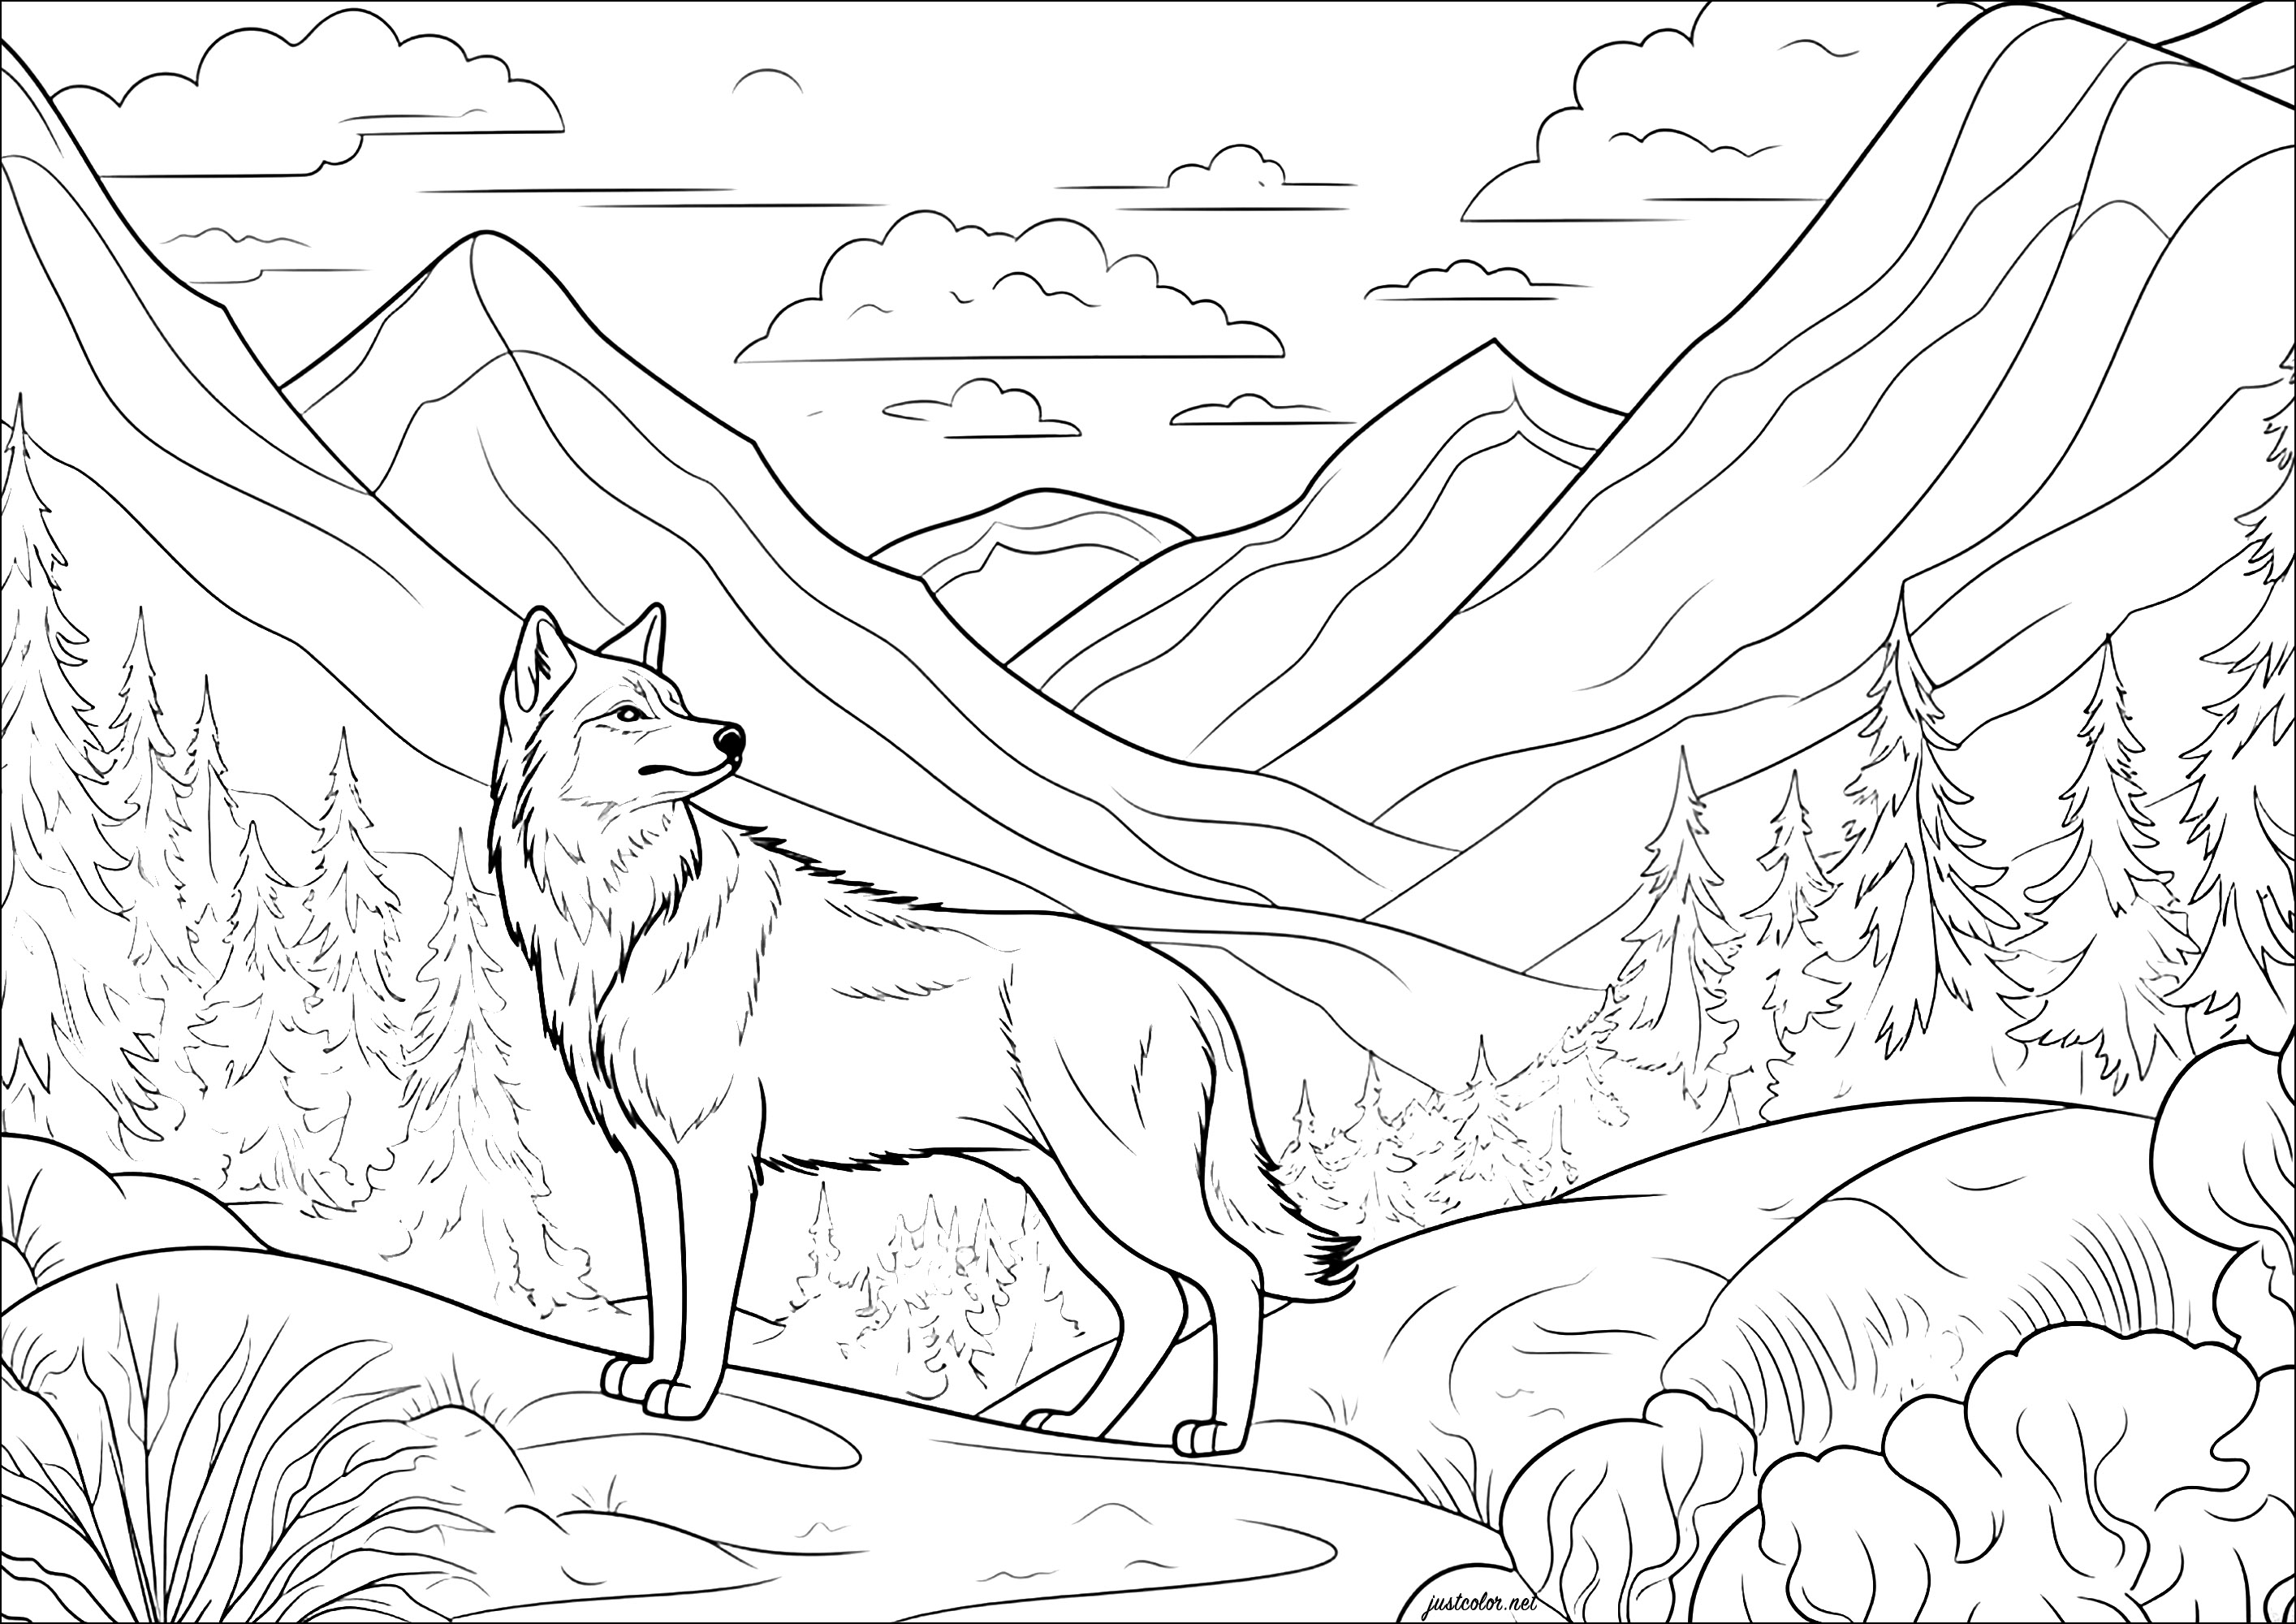 Wolf in the mountain. A peaceful, calm scene: you can feel the serenity emanating from this lovely coloring page depicting a wolf drawn in a very realistic way, integrated into a pretty landscape full of details to color.